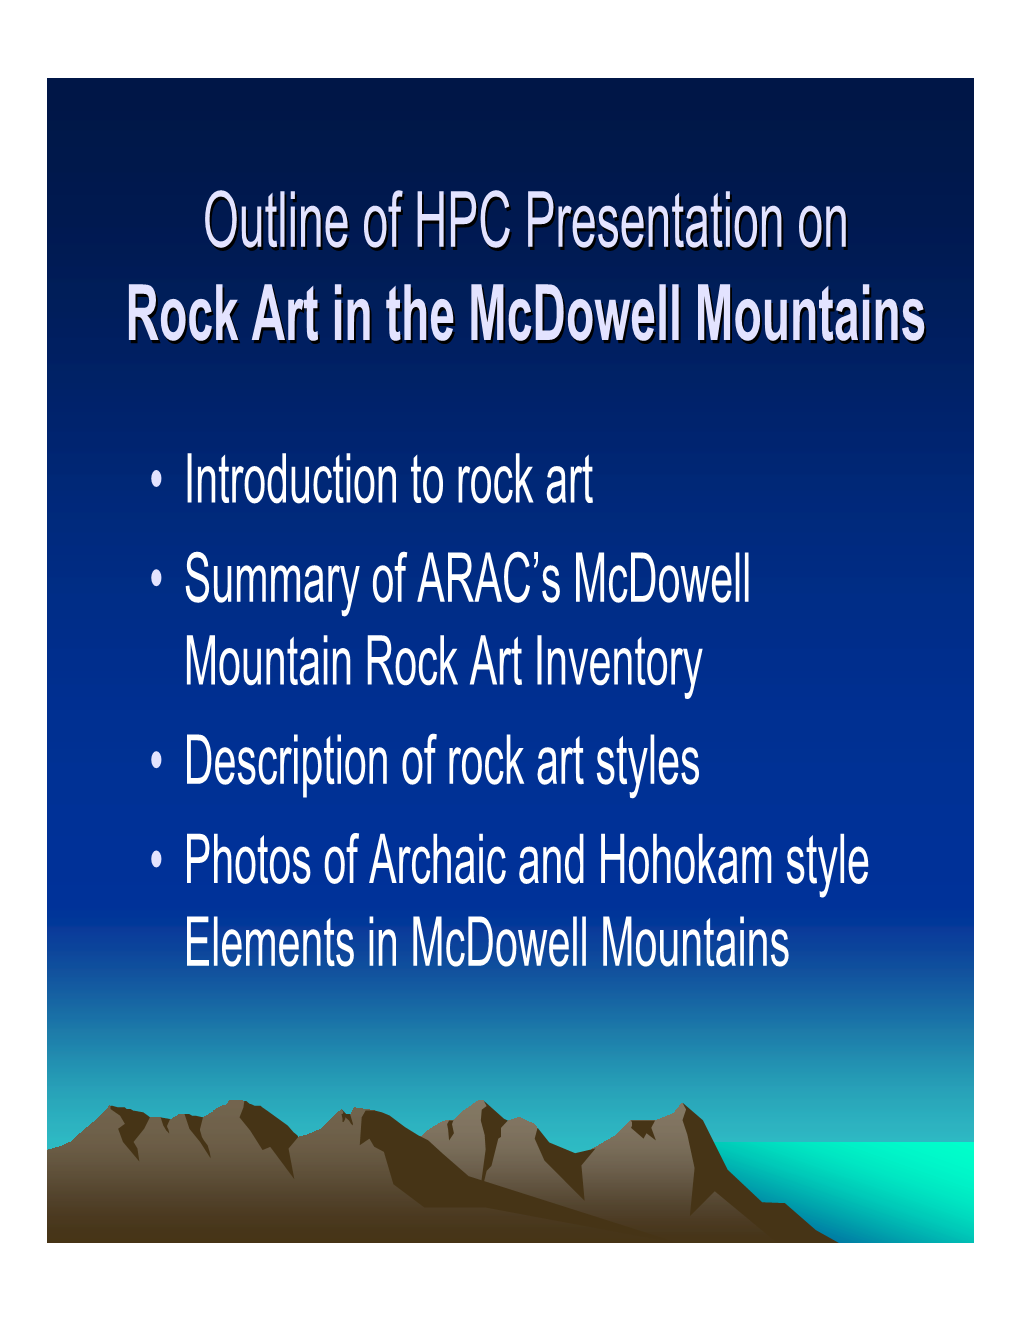 Rock Art in the Mcdowell Mountains